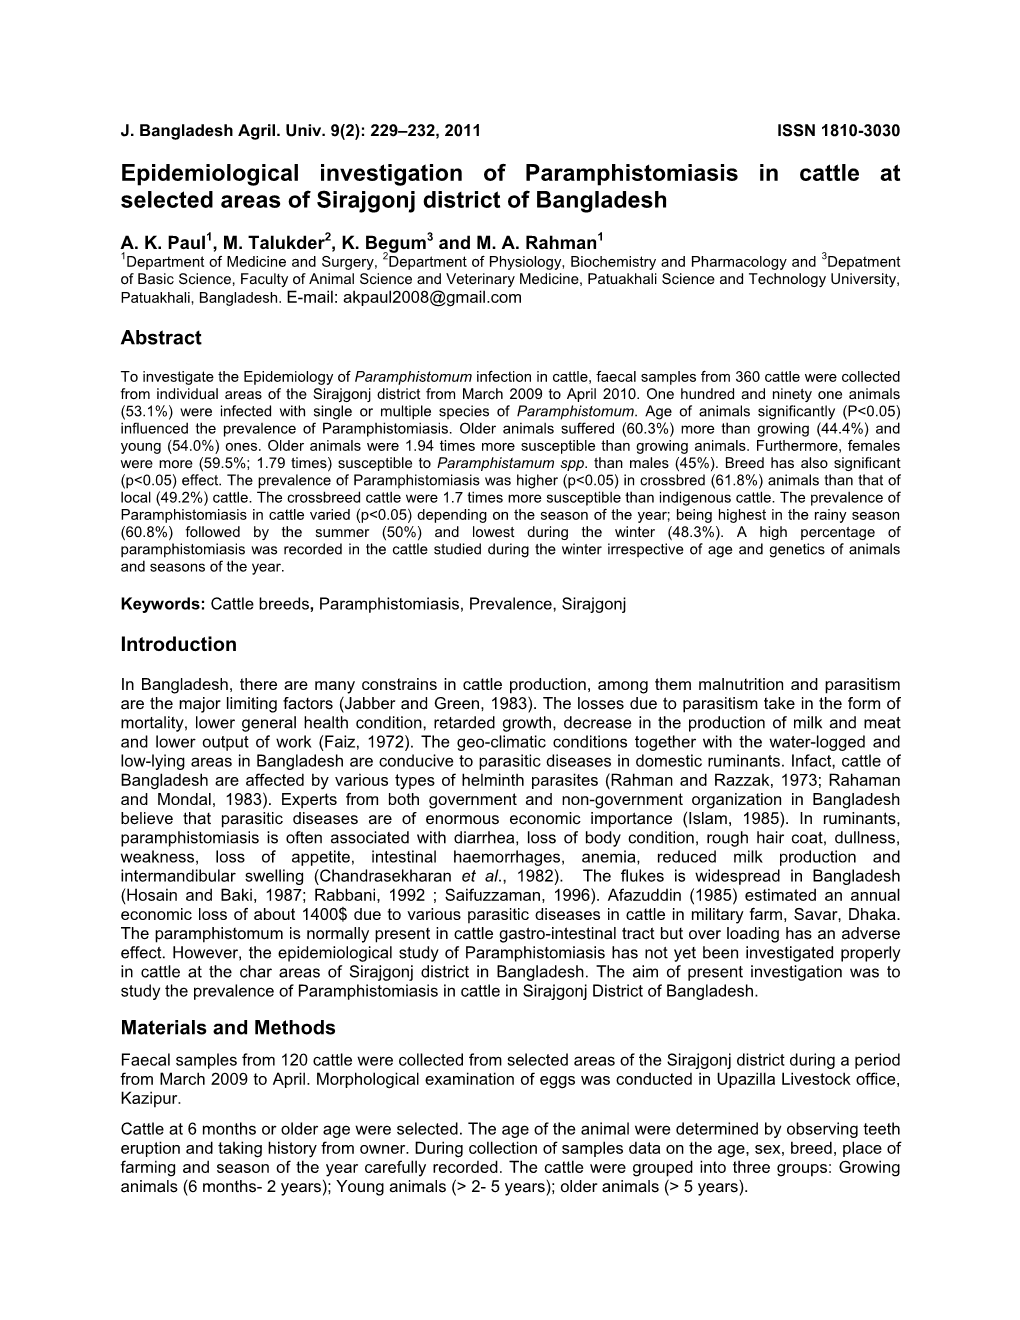 Epidemiological Investigation of Paramphistomiasis in Cattle at Selected Areas of Sirajgonj District of Bangladesh